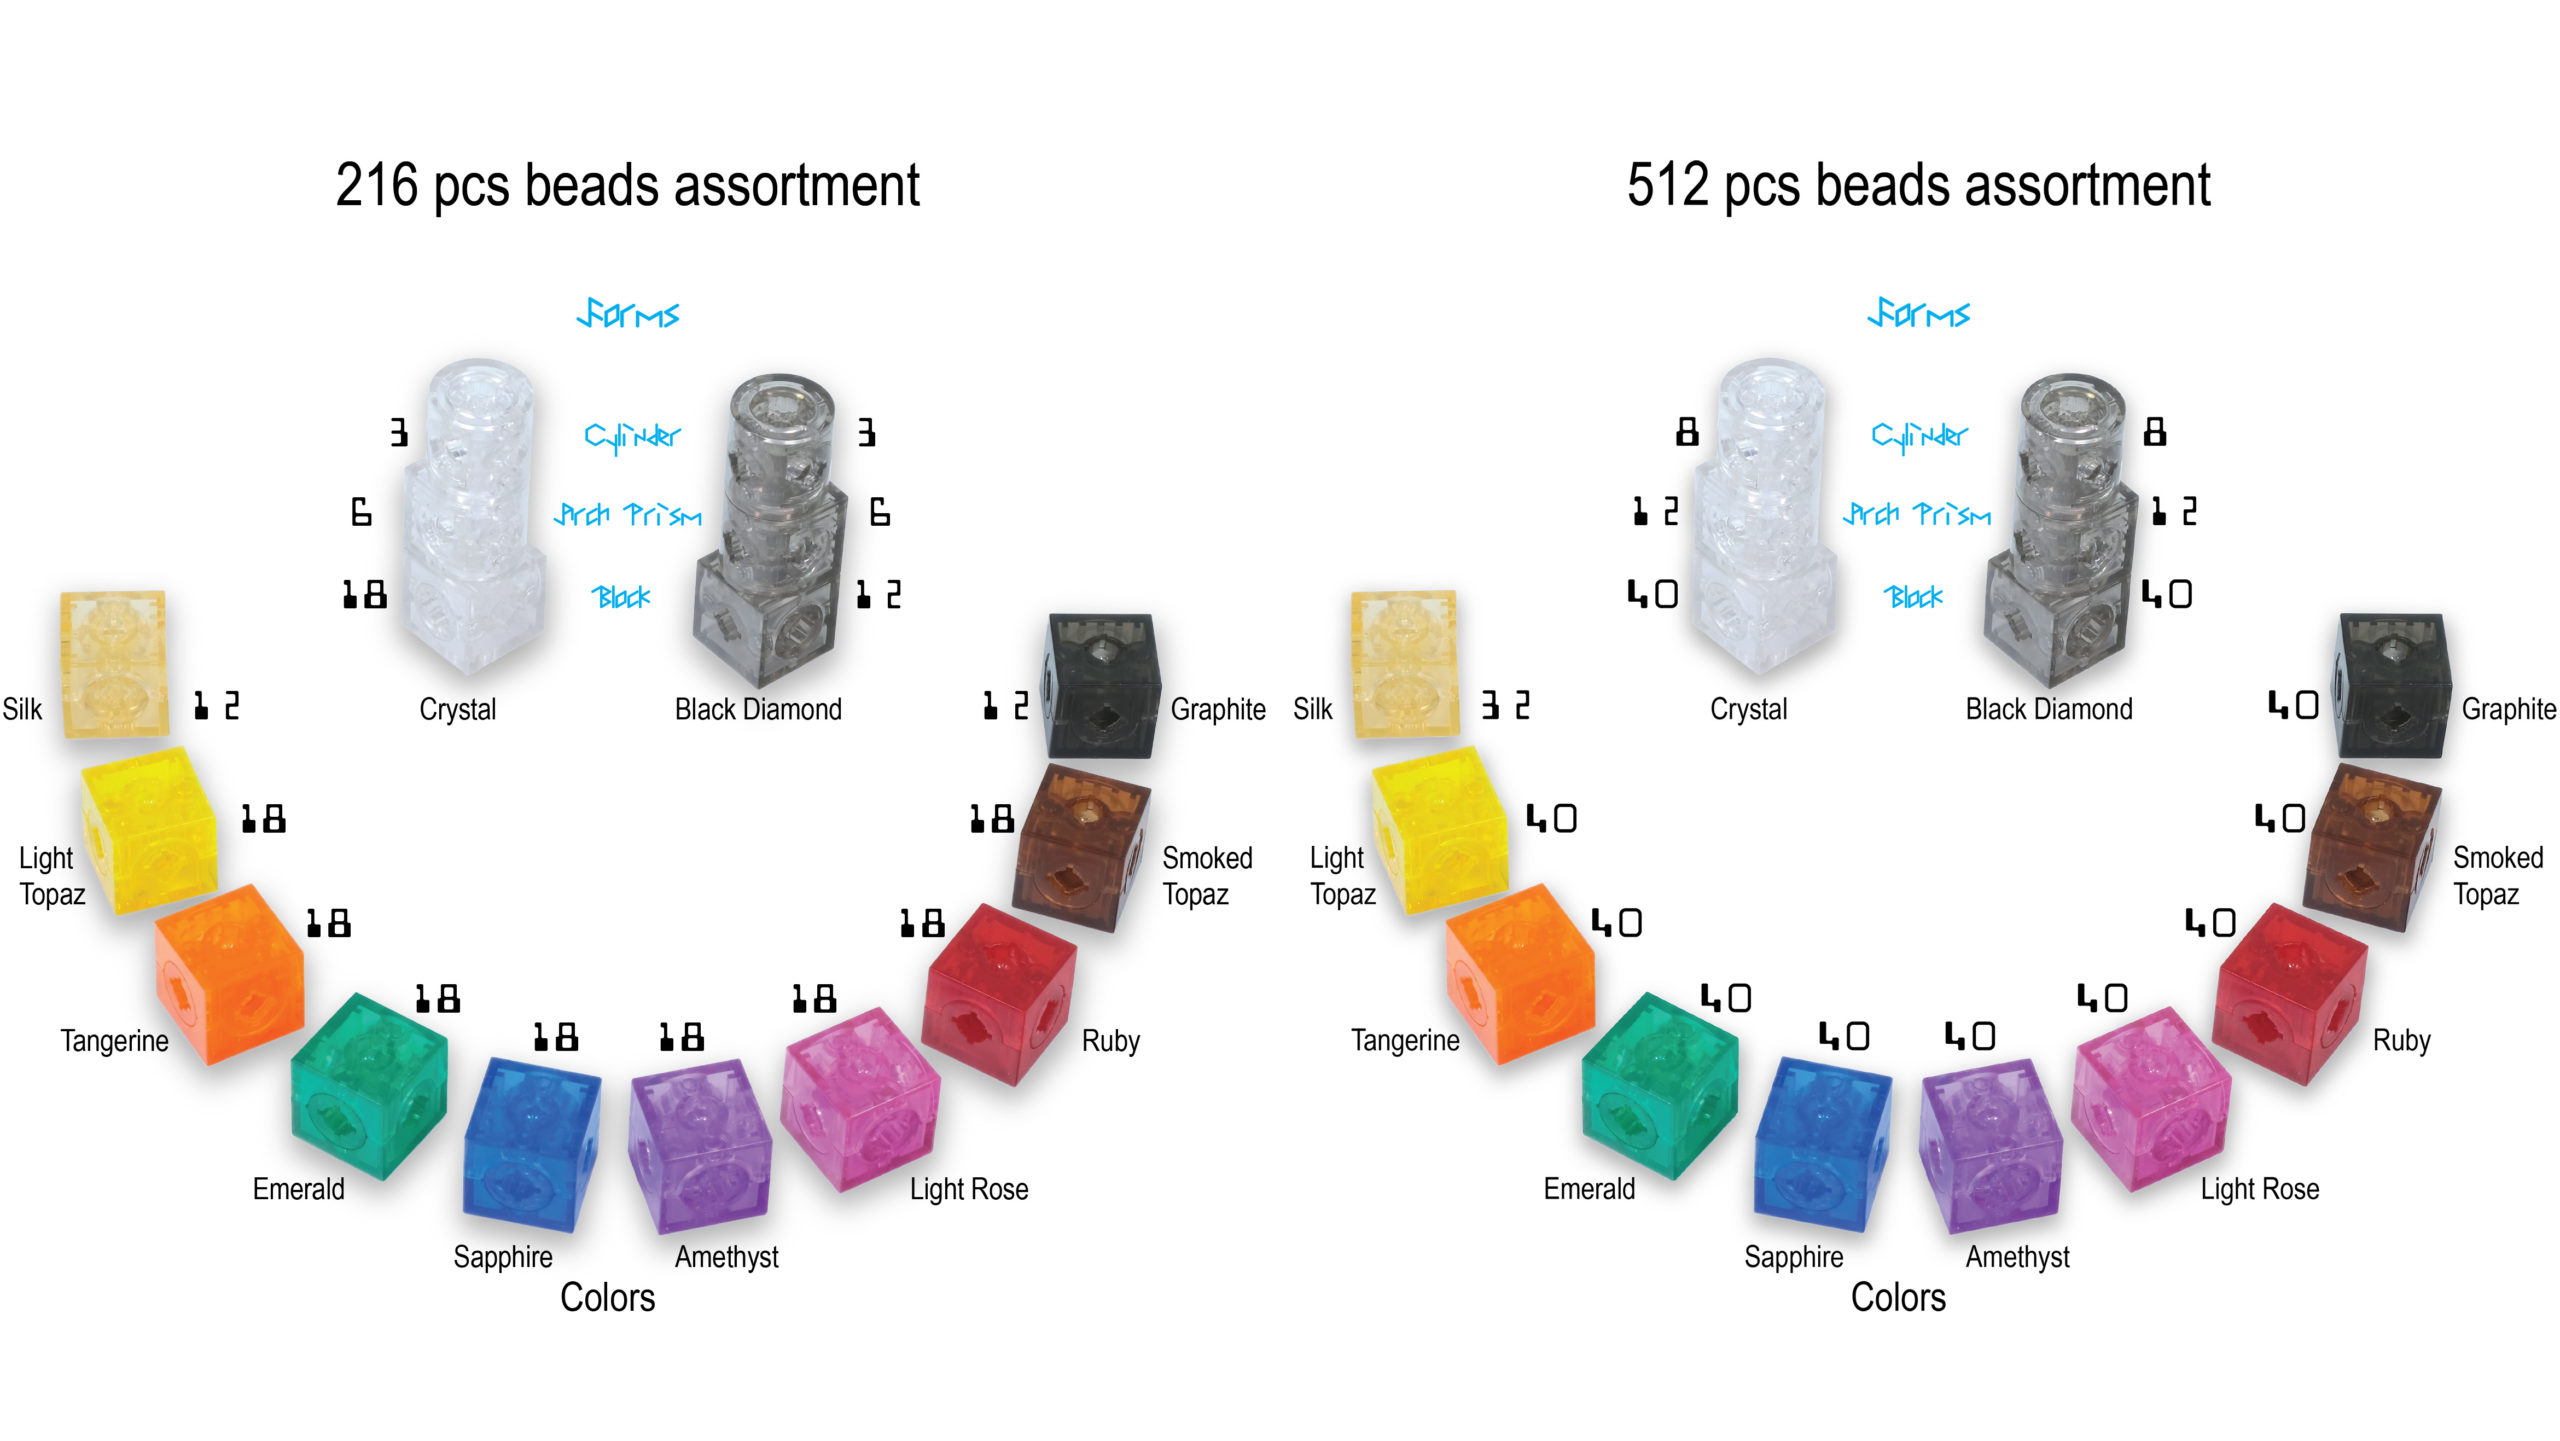 TransformCube Building Beads quantities in packaging of 216pcs and 512pcs